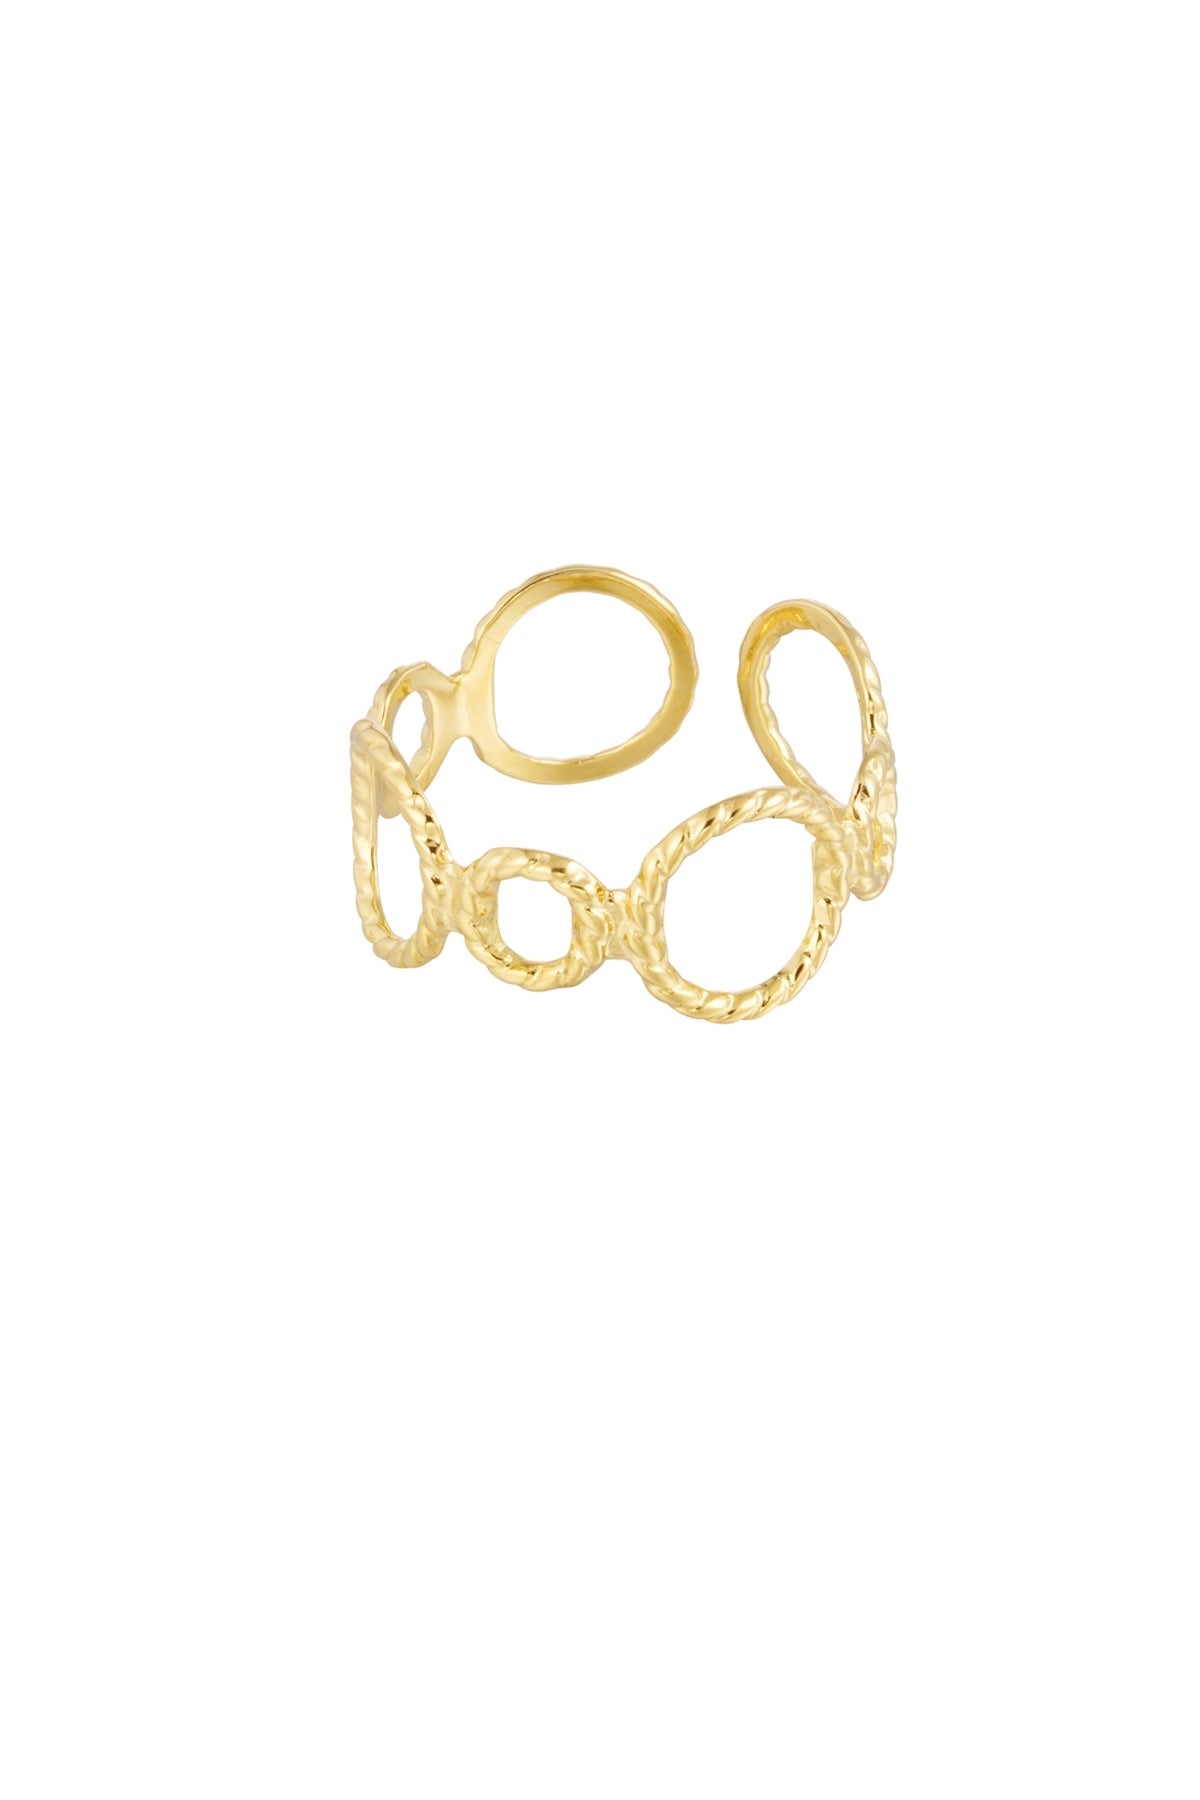 Cloud ring - gold